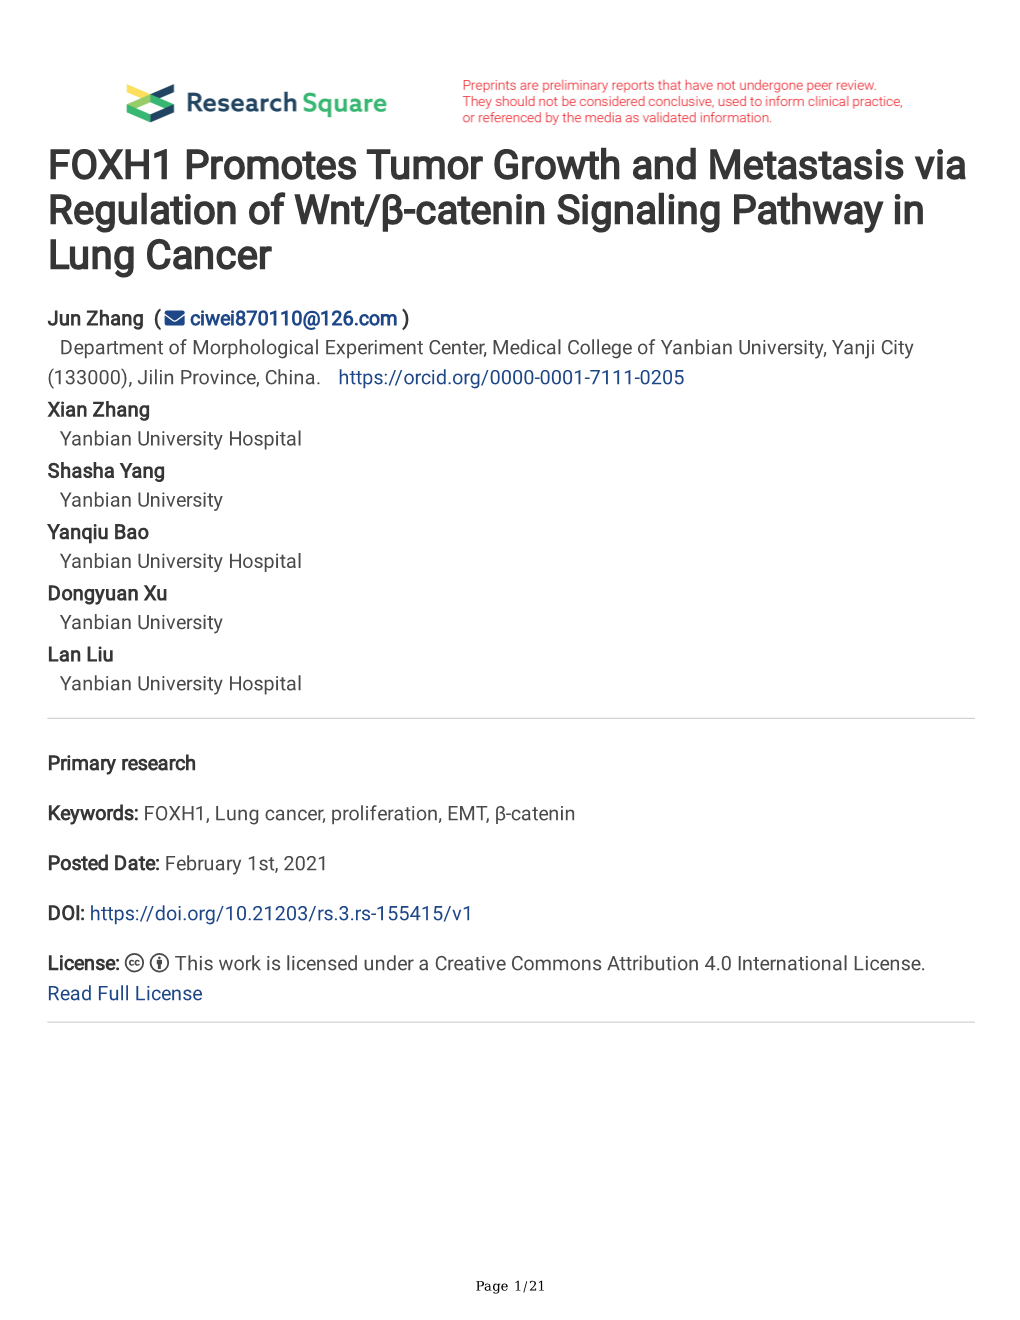 FOXH1 Promotes Tumor Growth and Metastasis Via Regulation of Wnt/Β-Catenin Signaling Pathway in Lung Cancer